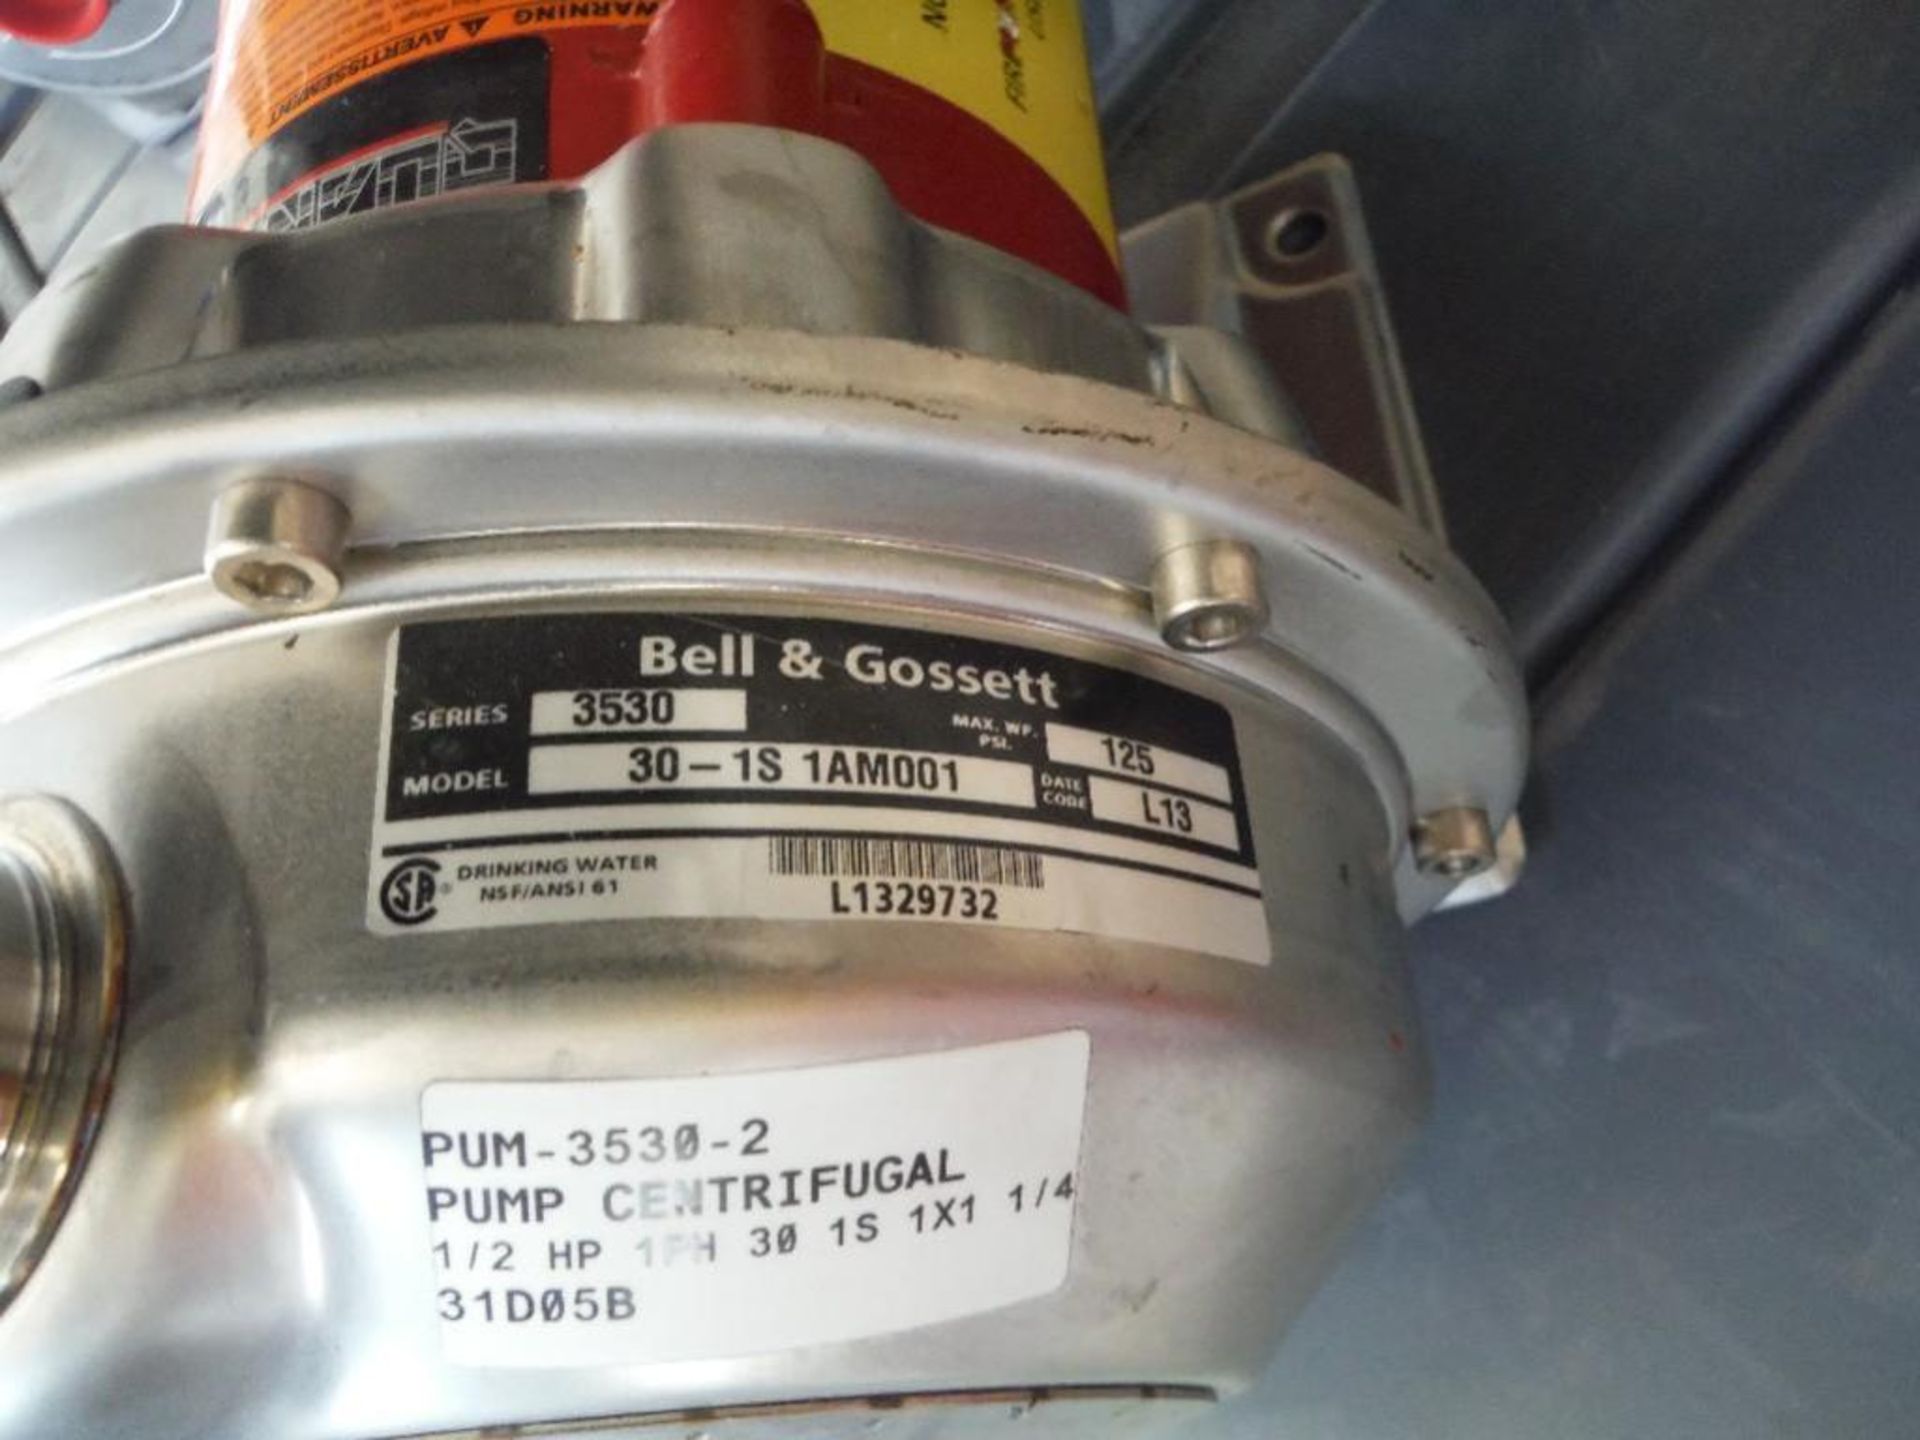 Bell and Gossett centrifugal pump, Model 30-1S 1AM001, Series, 3530, 1 x 1.25 in., 0.5 hp motor - Ri - Image 4 of 4